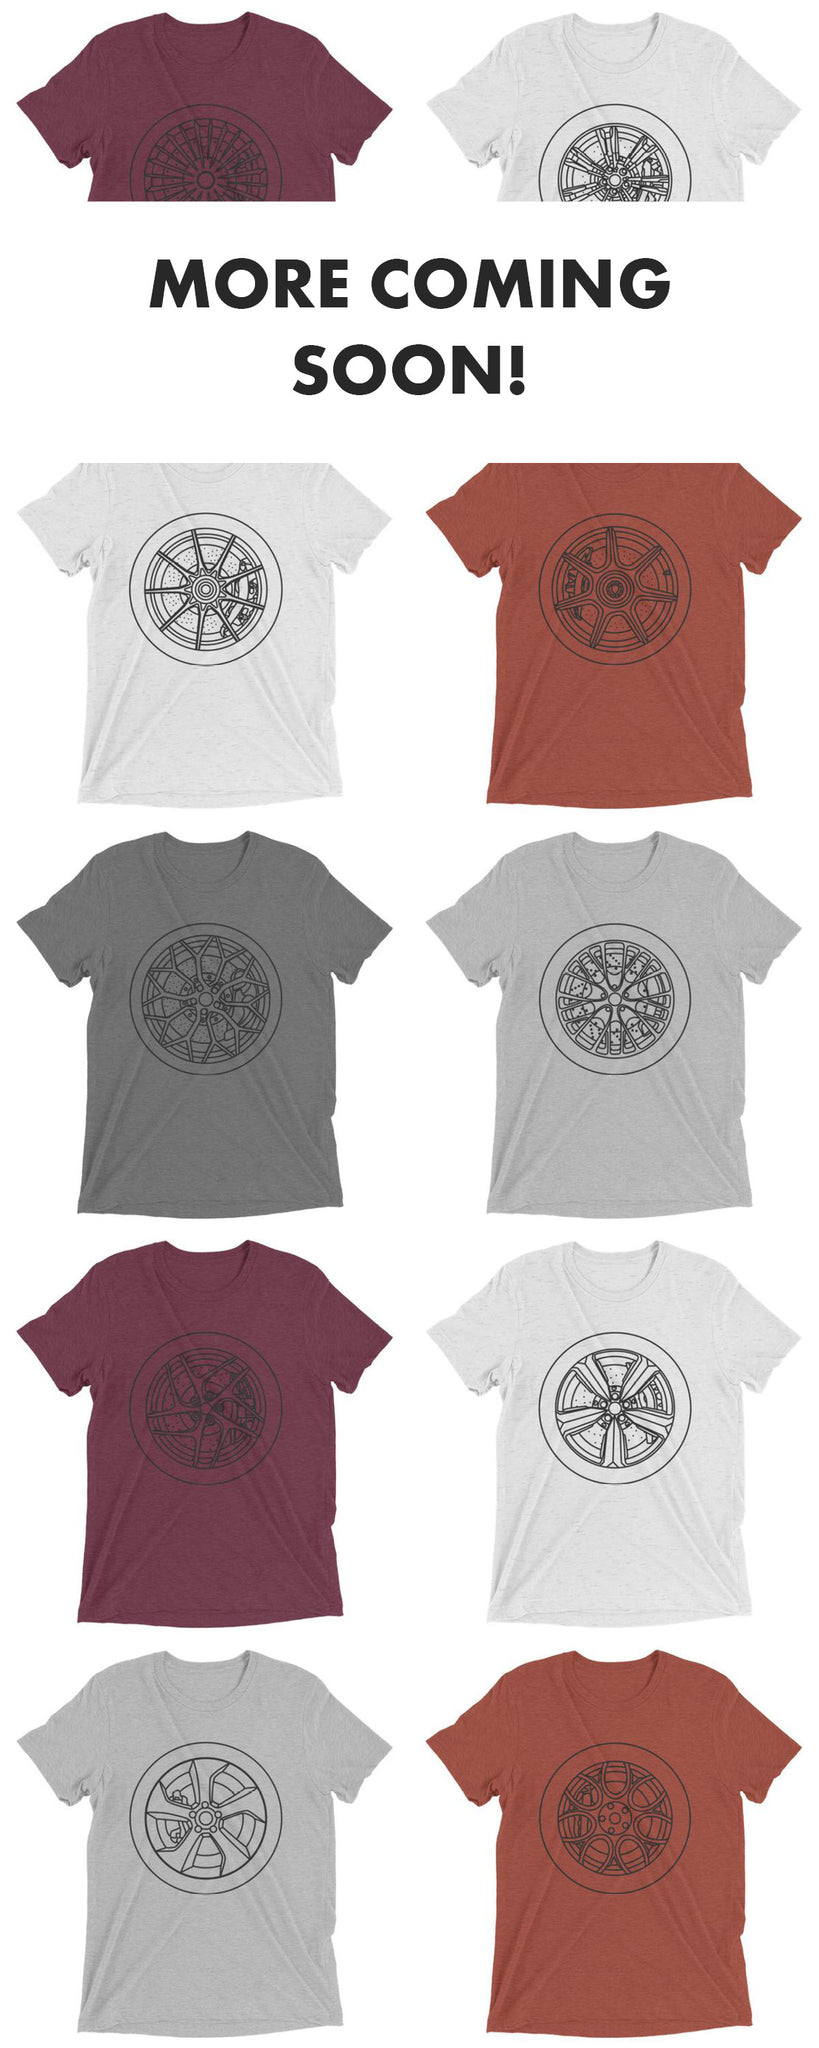 Minimal car wheel t-shirts now available on Artlines Design.